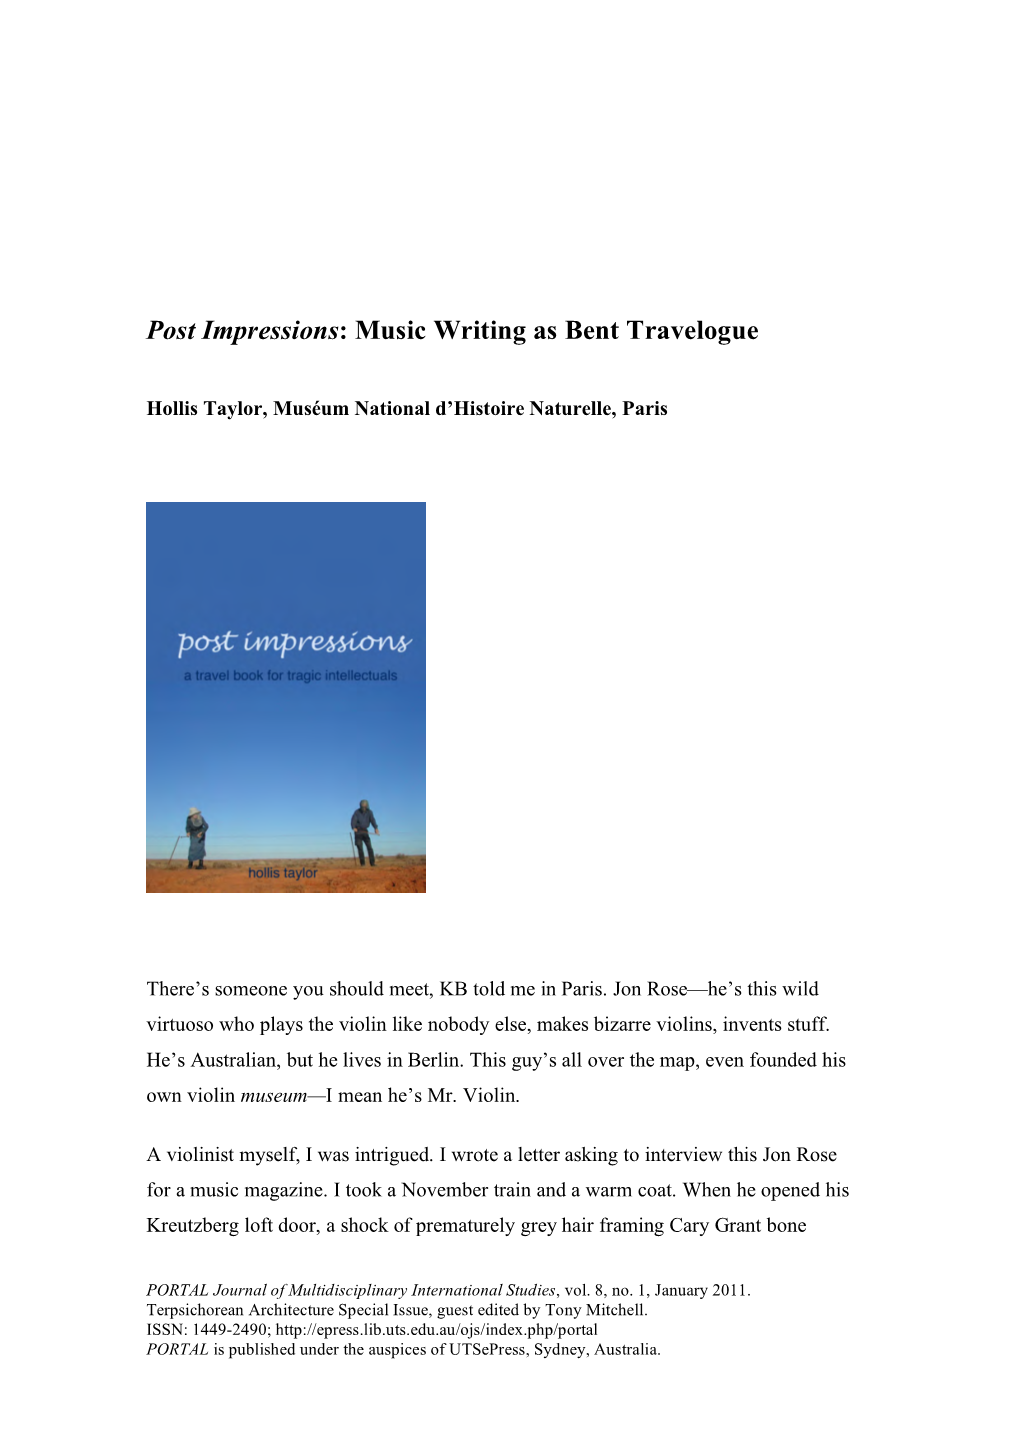 Post Impressions: Music Writing As Bent Travelogue